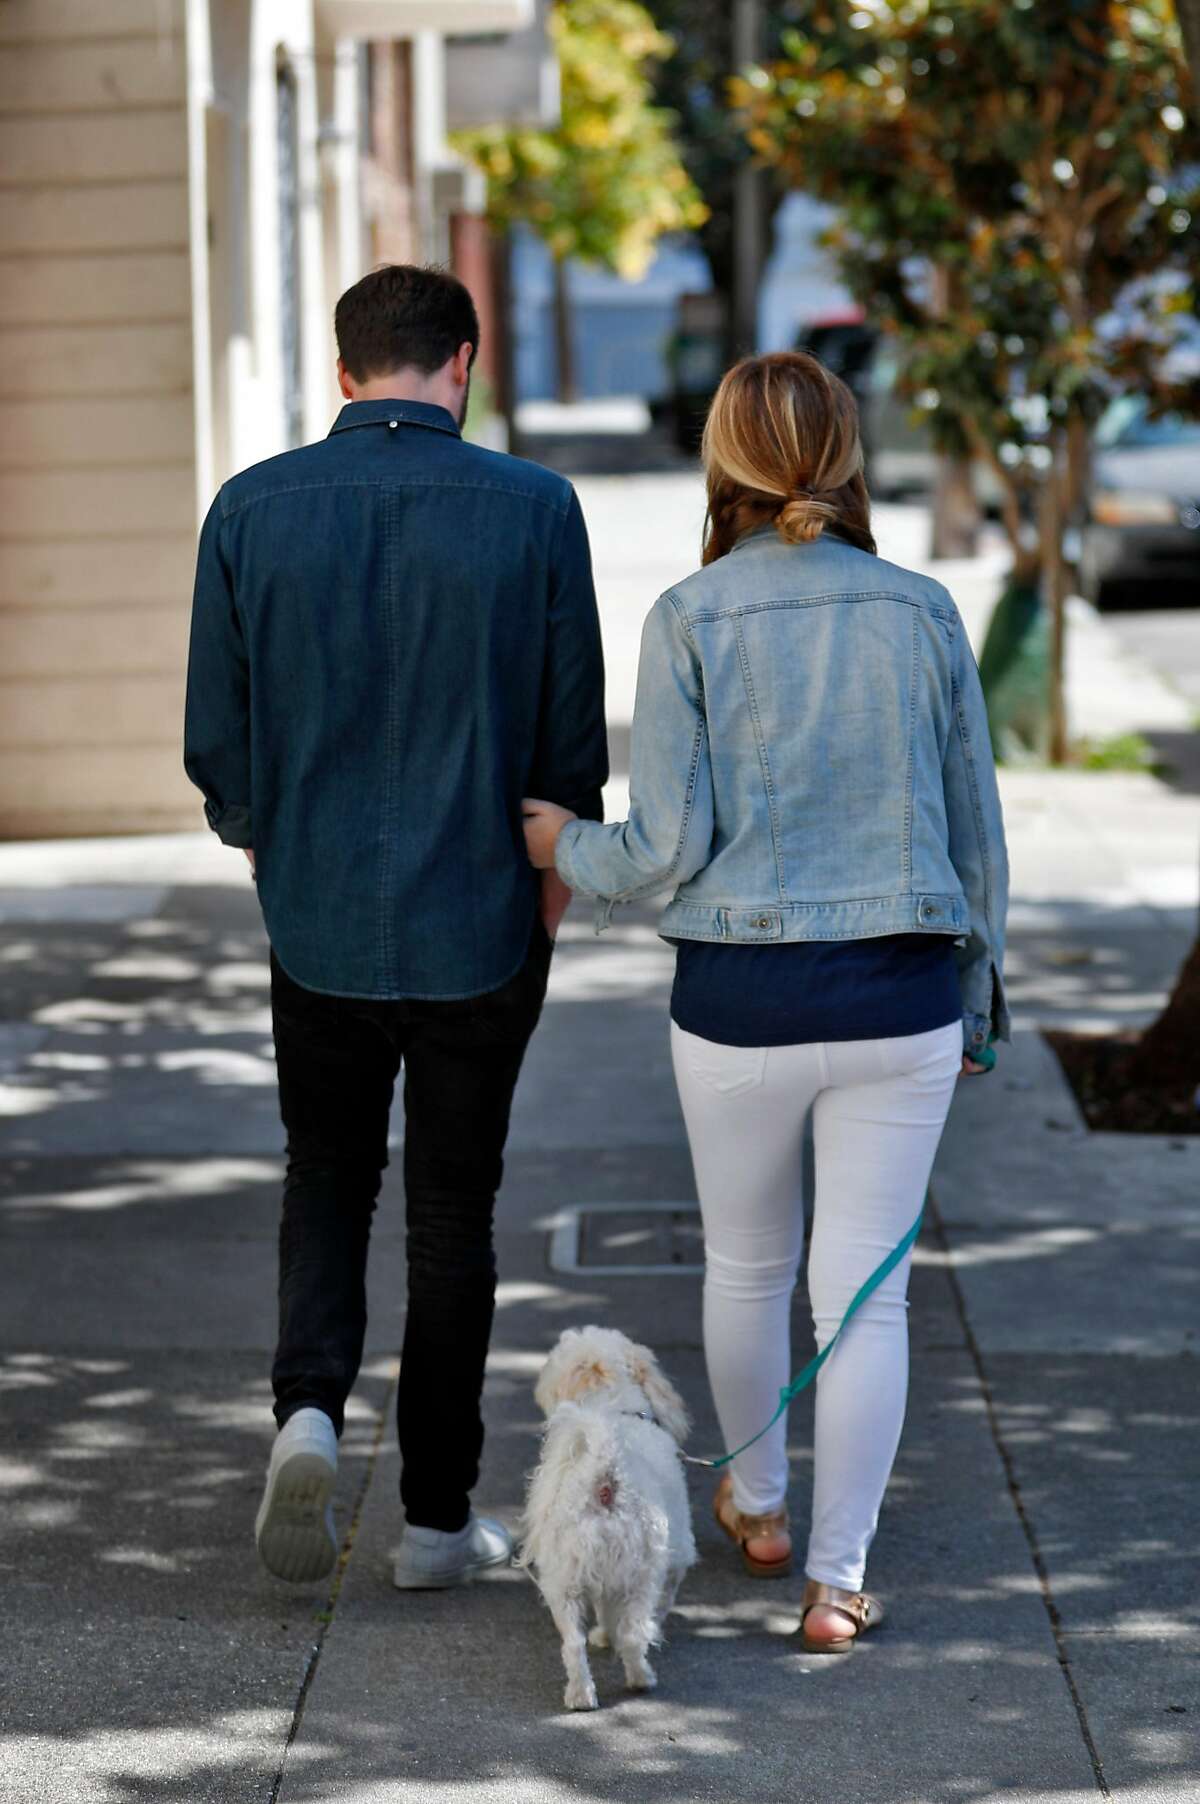 Julia and Jack Altman walk with their rescue dog Teddy near their home in the Mission District of San Francisco, Calif., on Sunday, July 7, 2019. The Altmans miscarried a baby a little over a year ago and found that reconnecting with nature and being outside to be very therapeutic. Jack felt so moved by the experience that he instituted a miscarriage leave policy at his startup, Lattice.